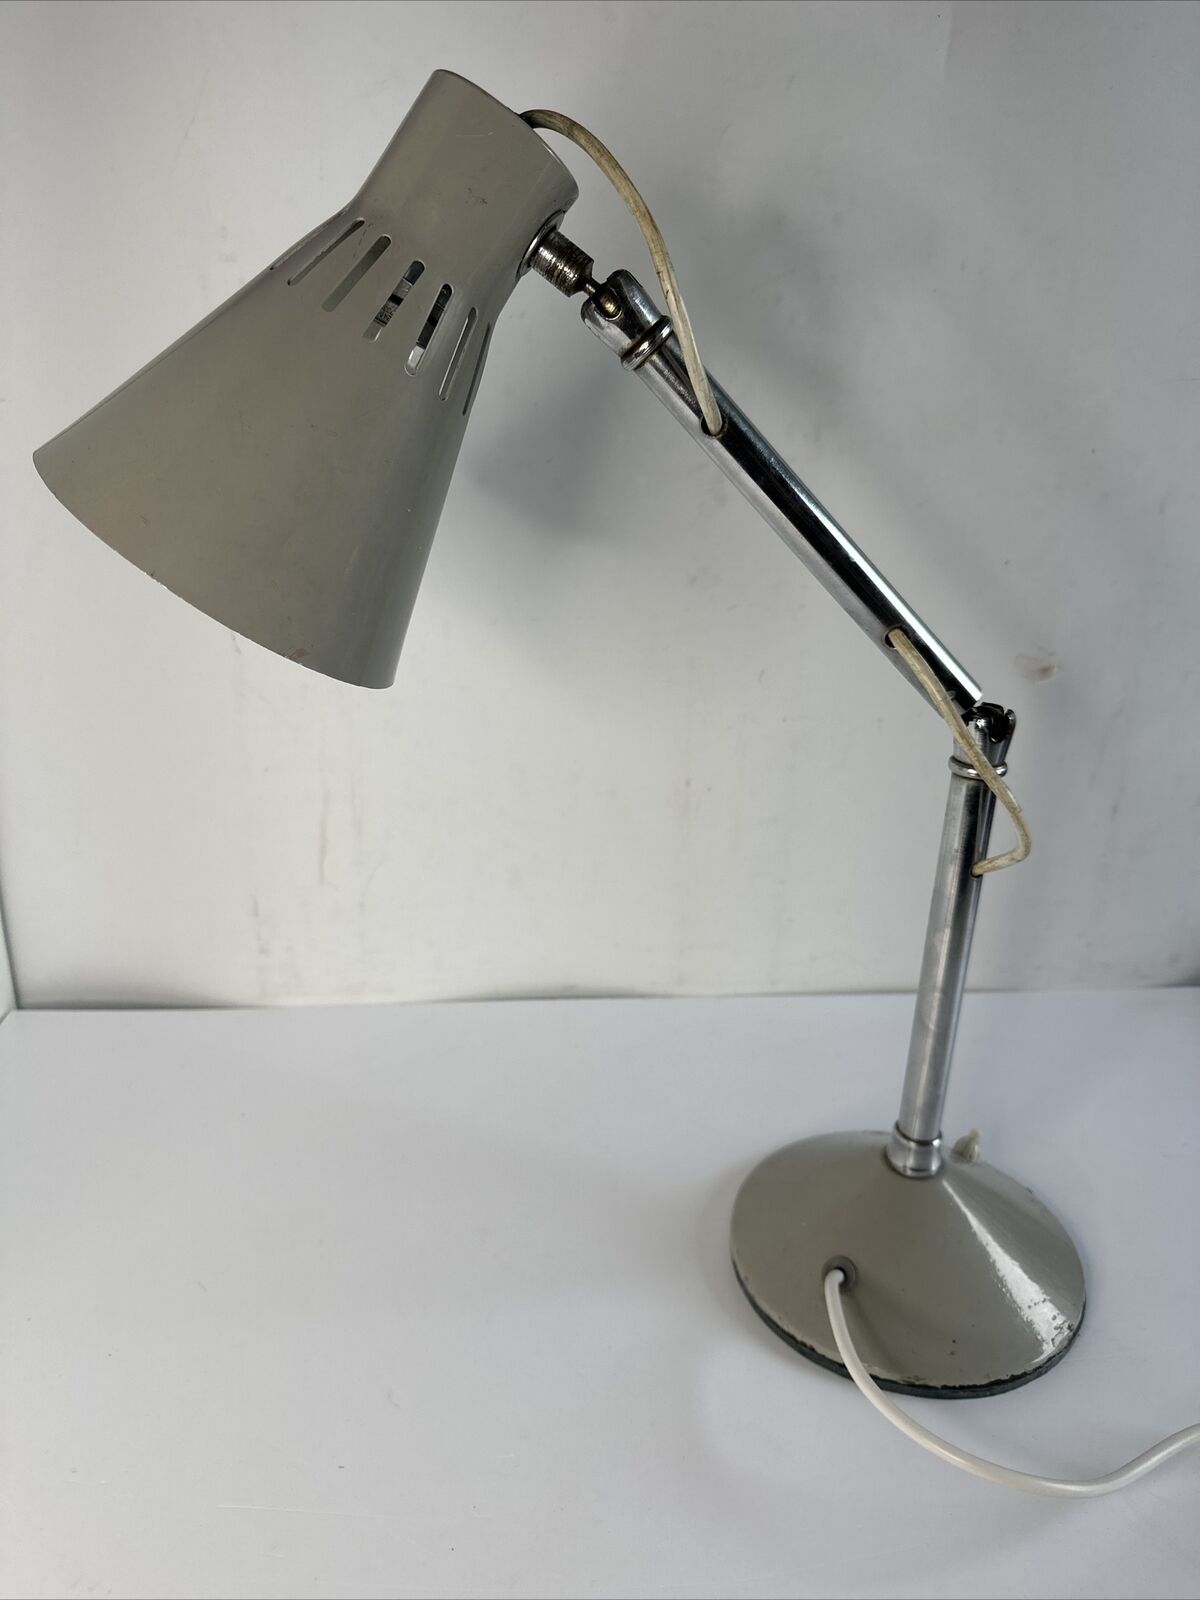 Old PIFCO Ball Jointed Desk lamp - Refurbished & PAT Tested